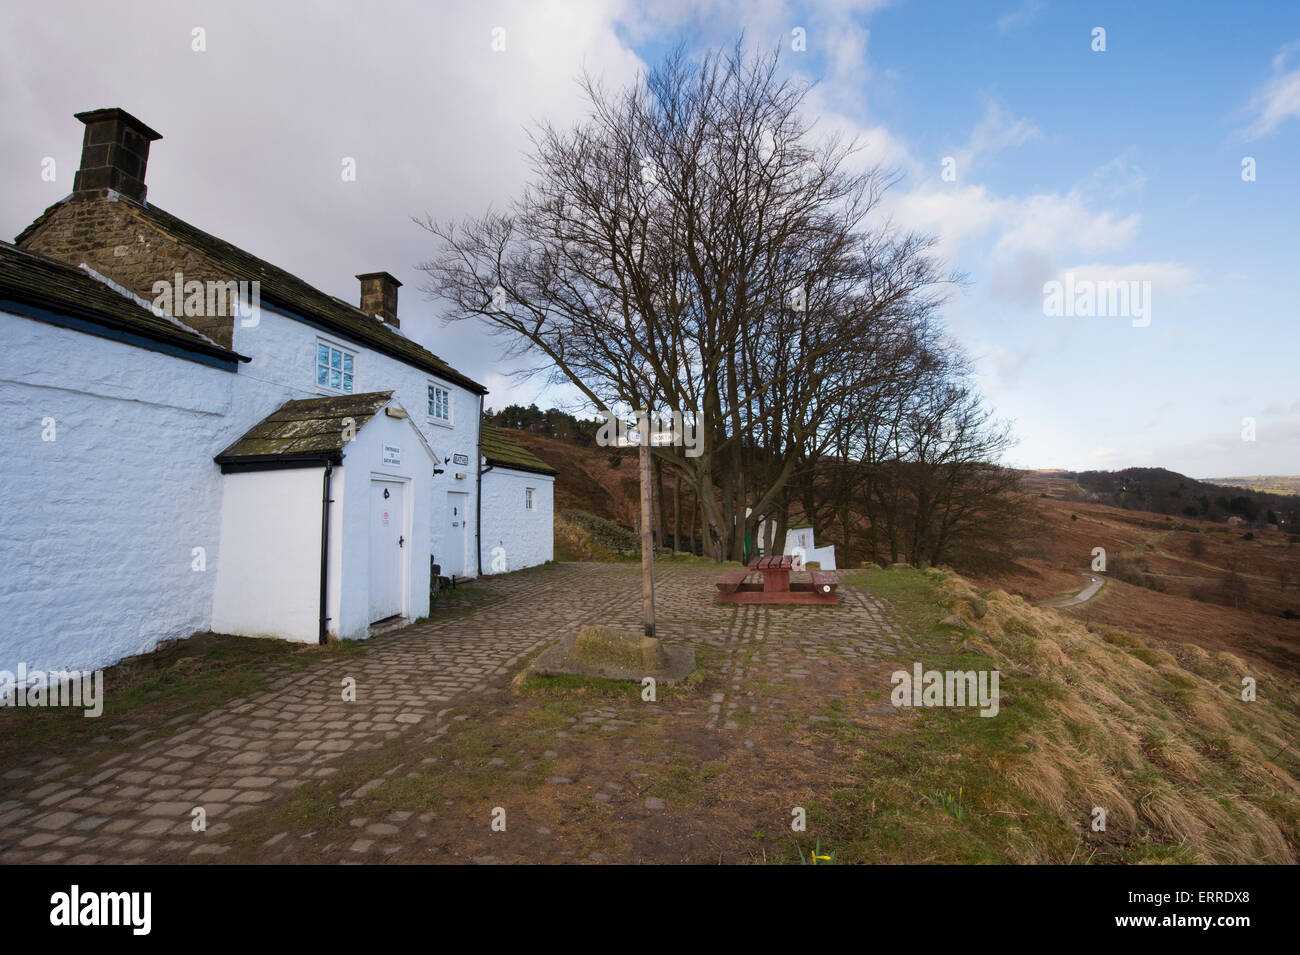 Under blue sky, rustic, solitary & isolated, White Wells Spa Cottage, is perched high on a hillside slope - Ilkley Moor, West Yorkshire, England, UK. Stock Photo